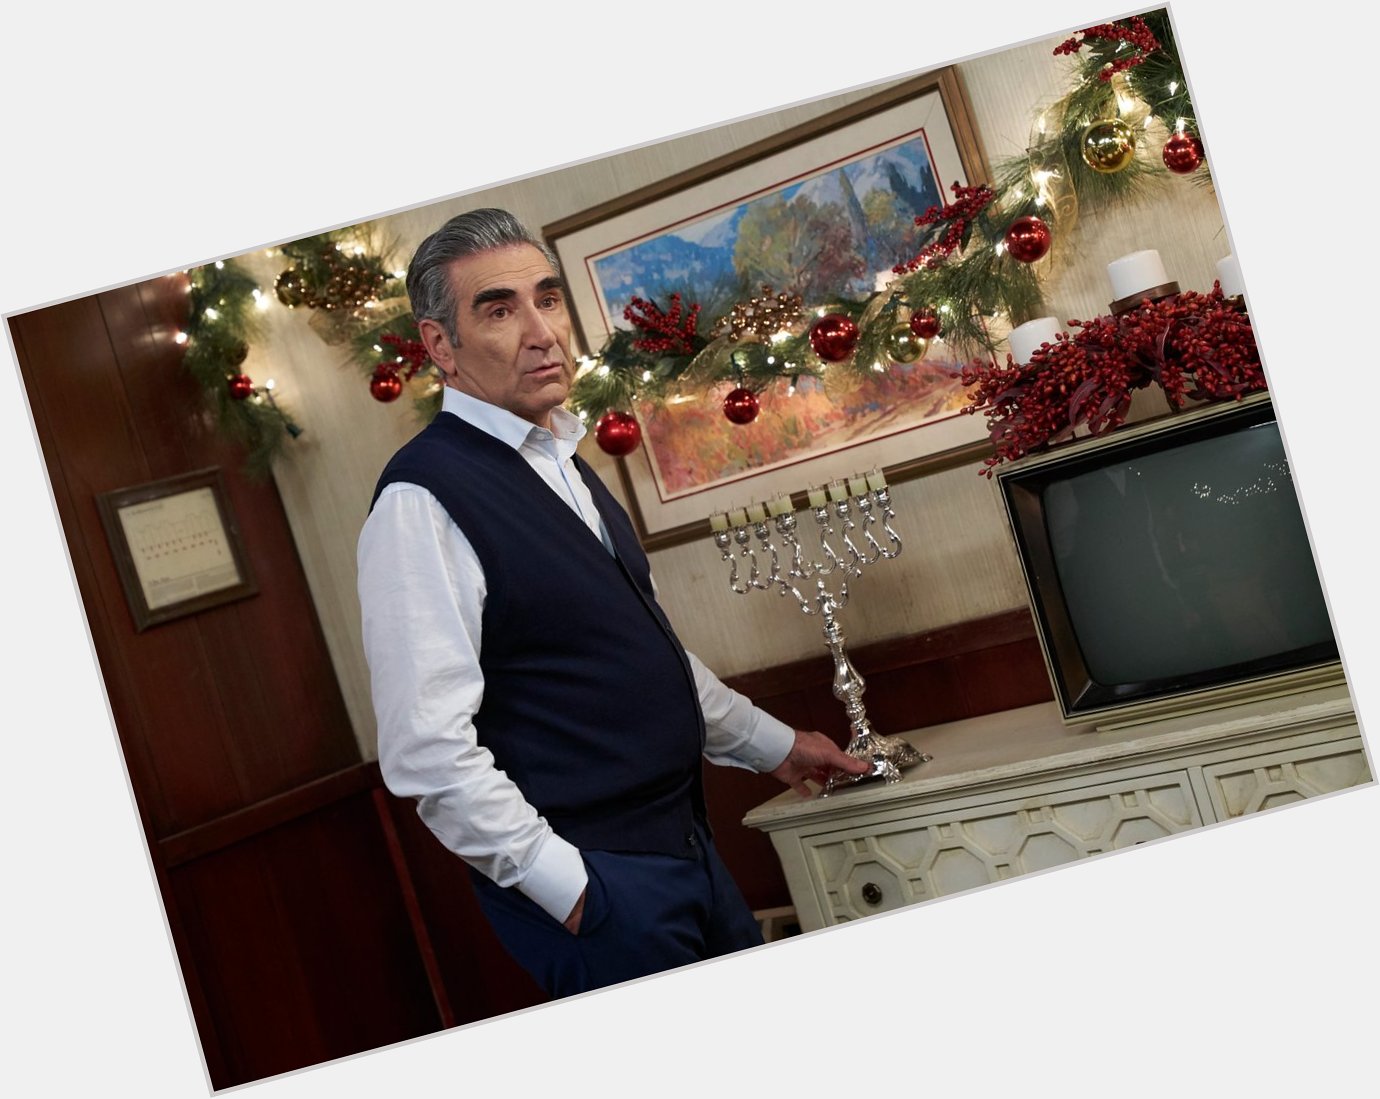 We\re celebrating two things today:

- the last day of Hanukkah
- Eugene Levy\s birthday

happy holidays! 